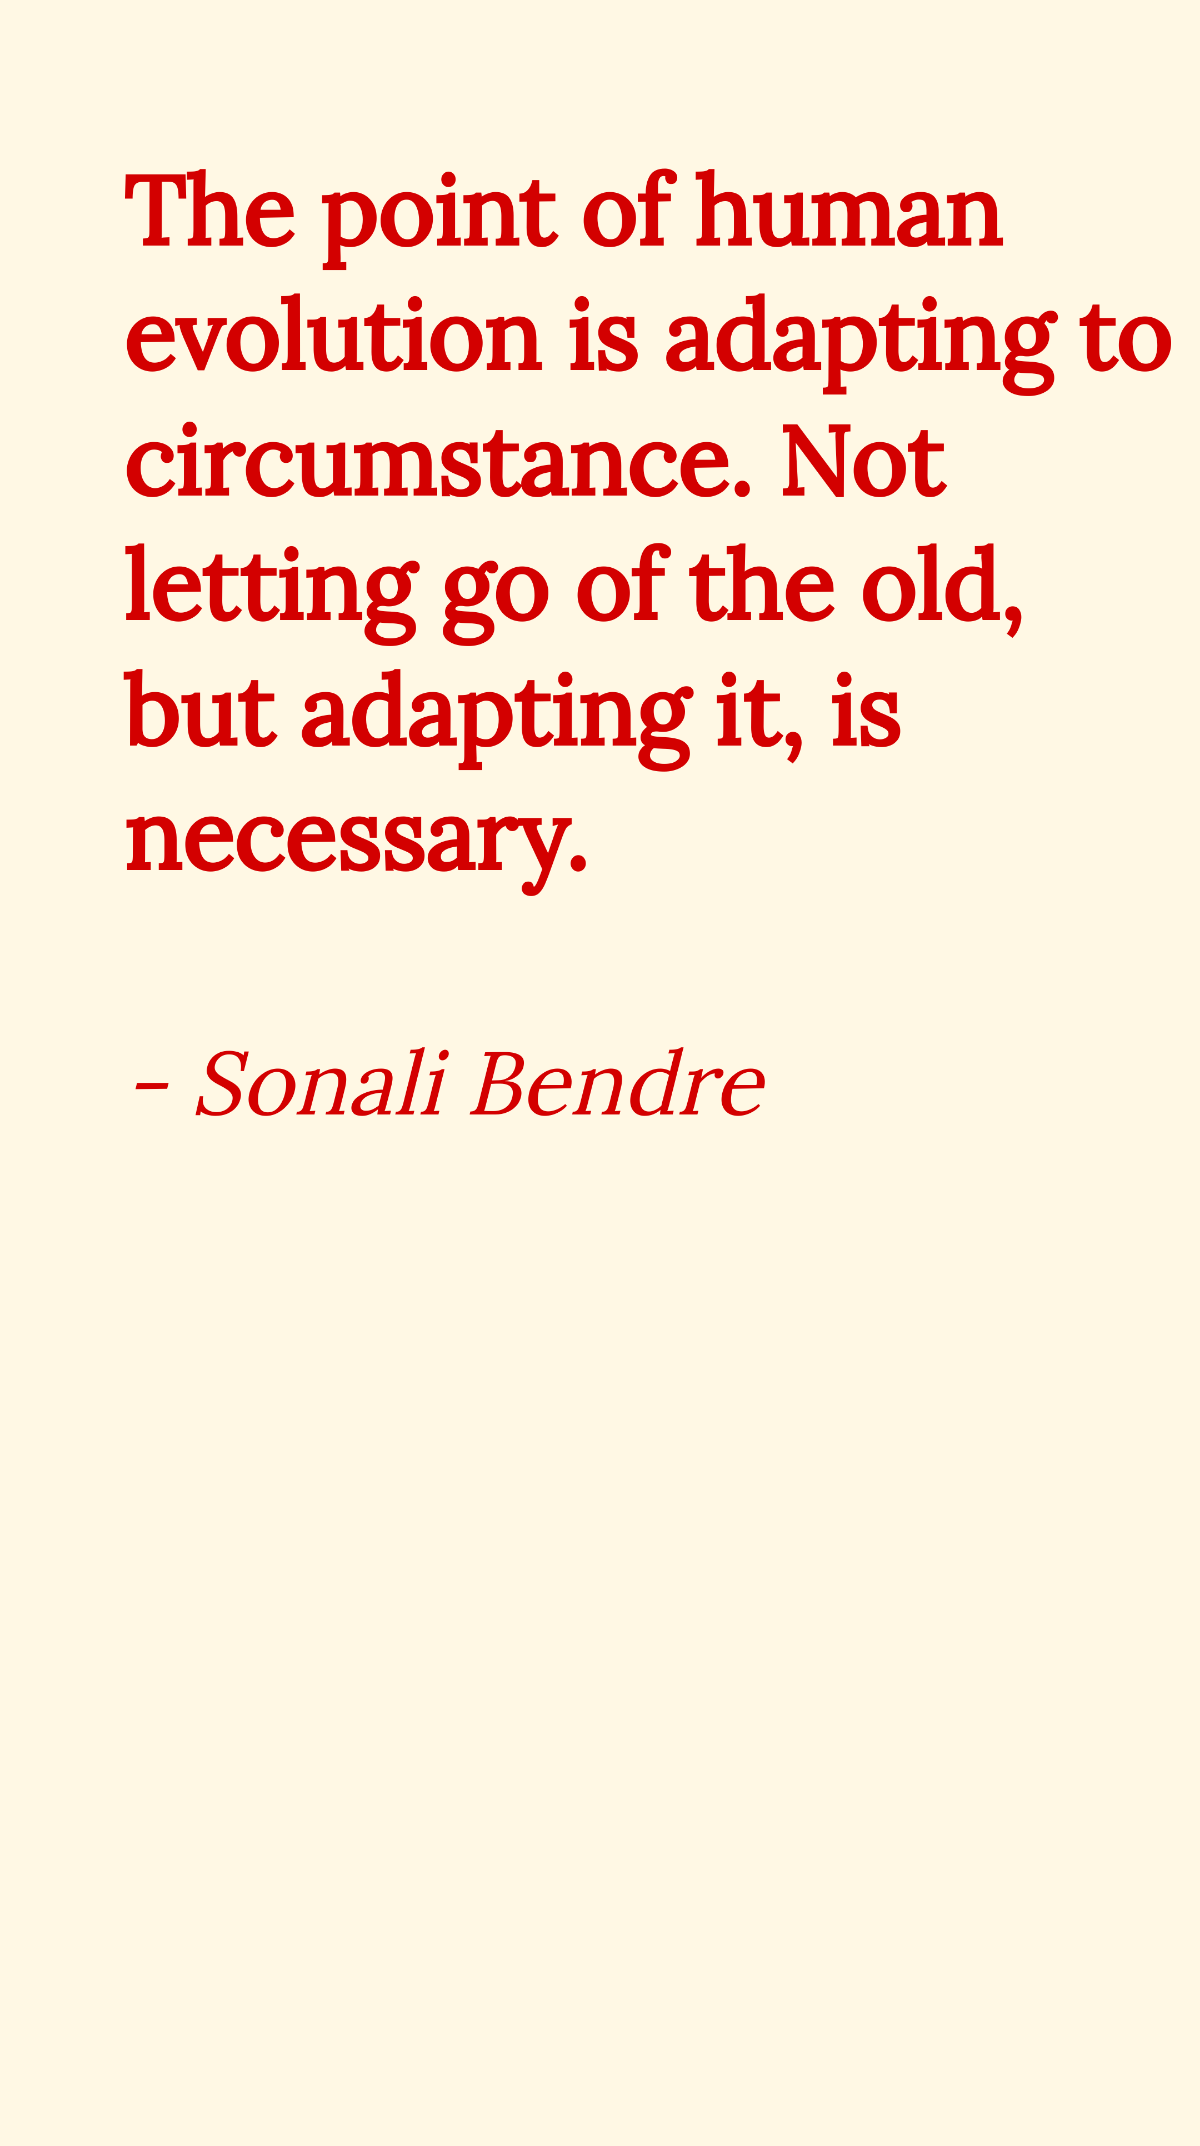 Sonali Bendre - The point of human evolution is adapting to circumstance. Not letting go of the old, but adapting it, is necessary.